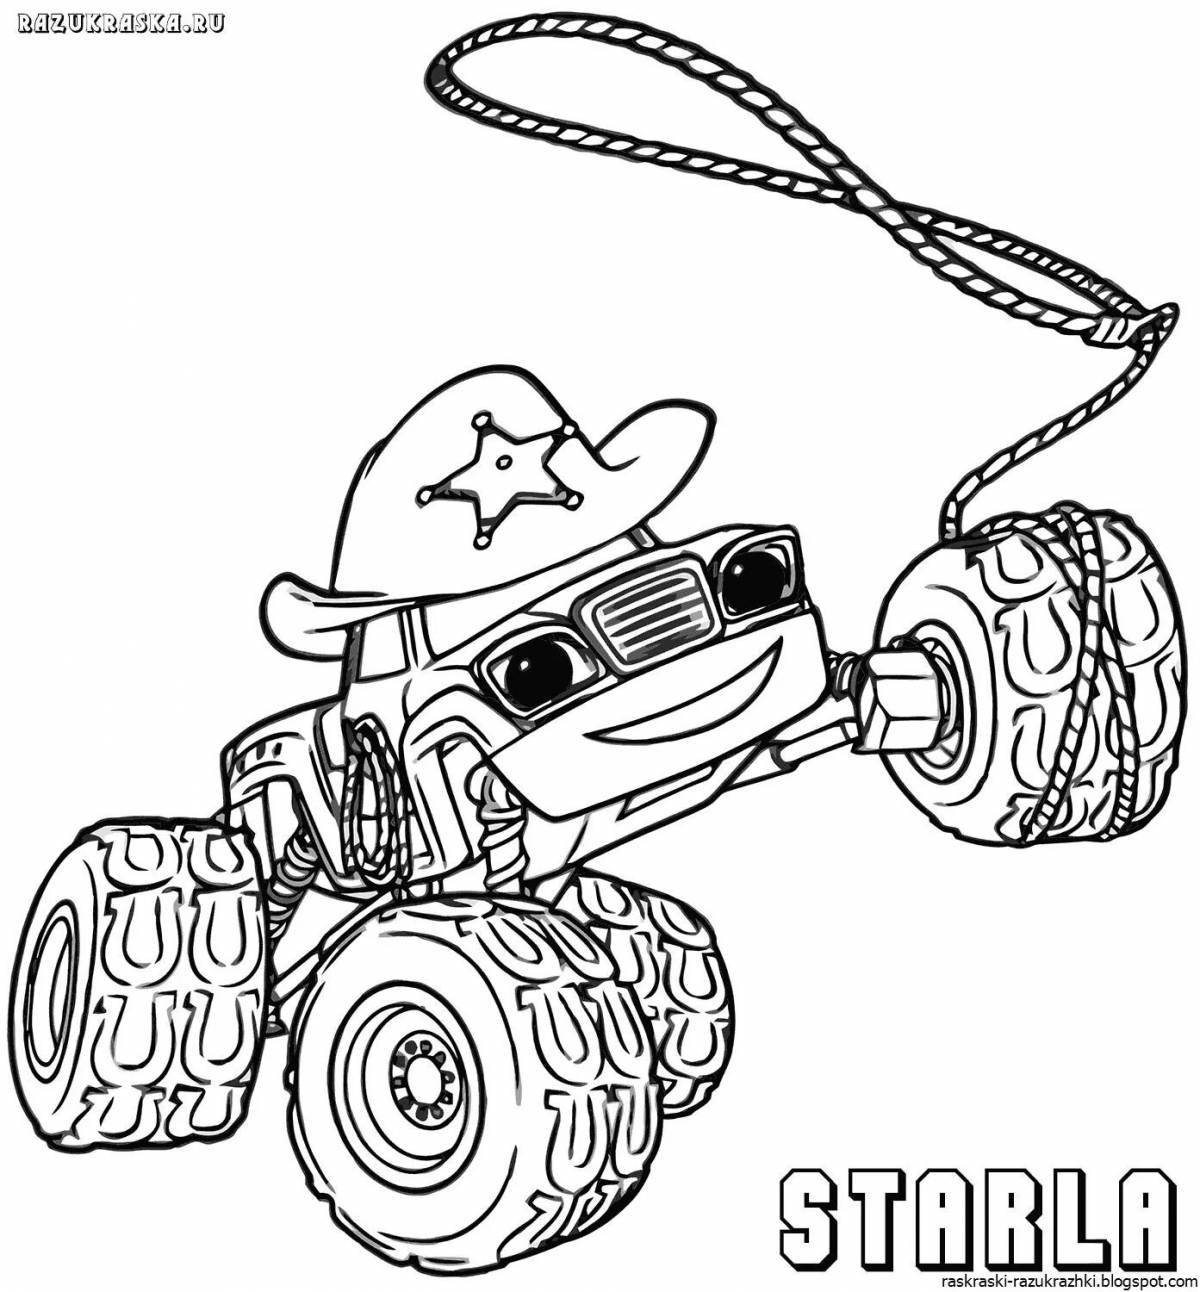 Glorious starla coloring page